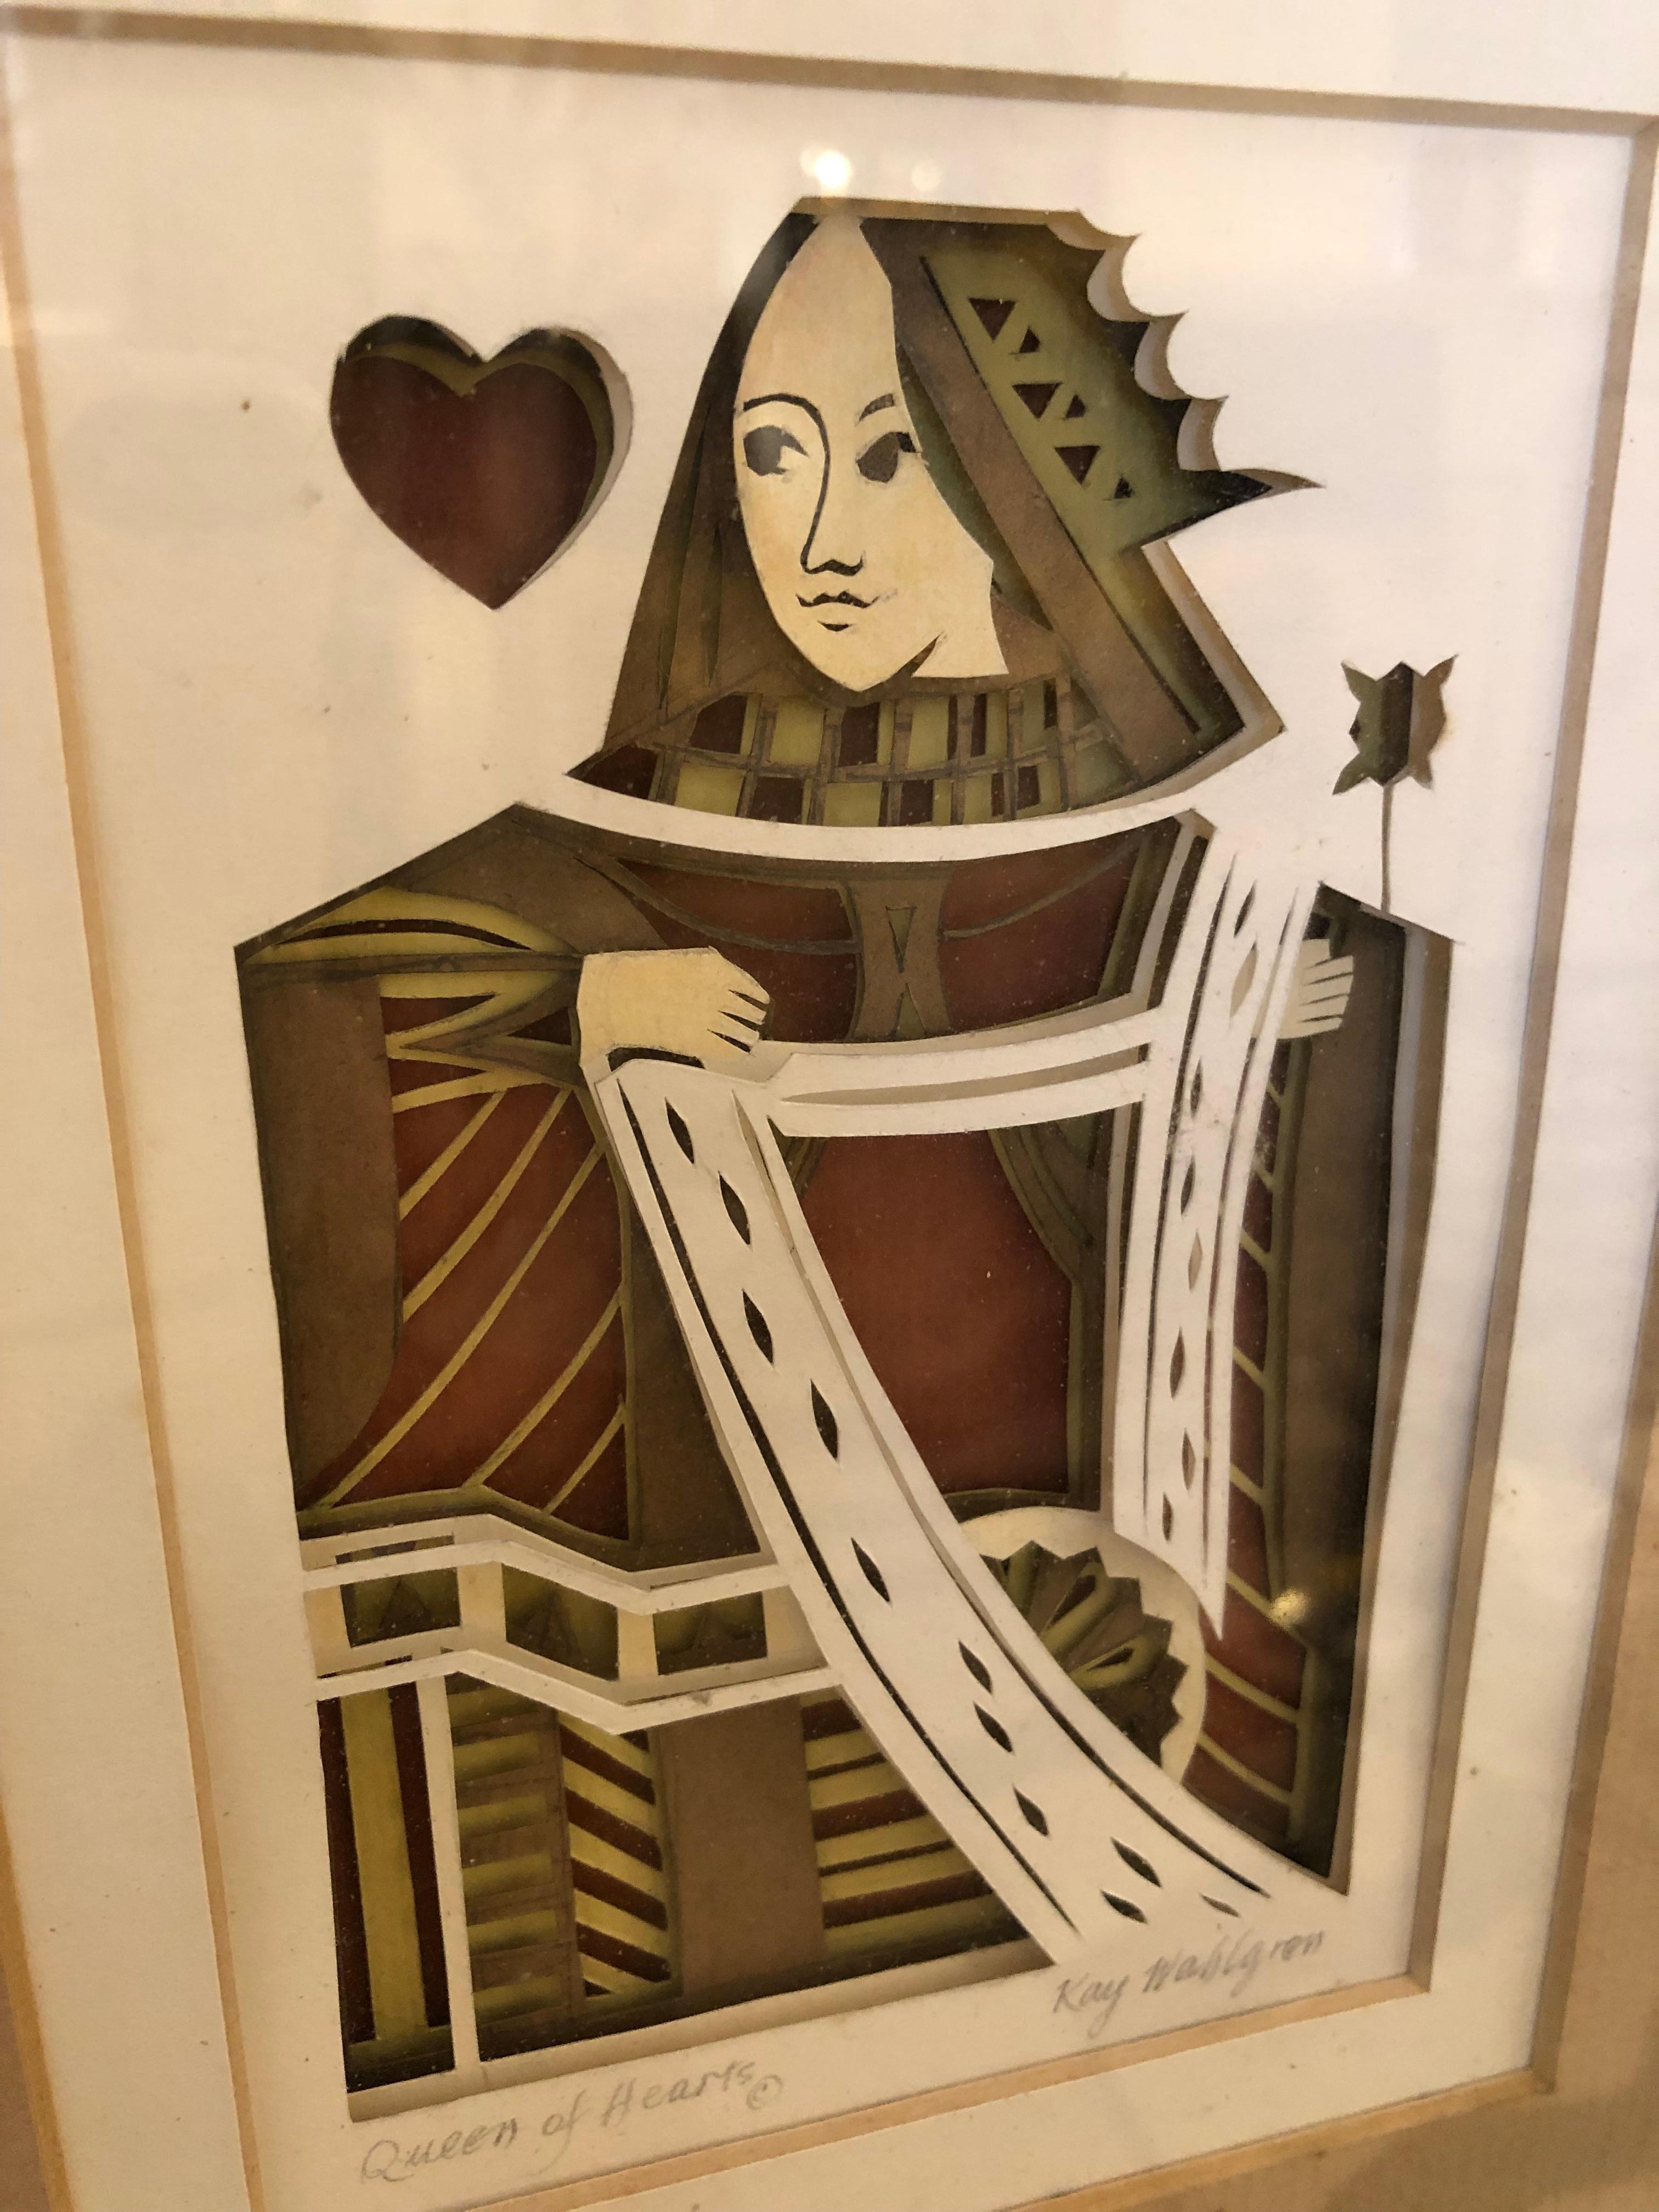 Beautiful meticulously constructed paper sculpture with layers of cut paper to give a 3 dimensional quality to the subject, the Queen of Hearts playing card.
Signed by the artist lower right.  